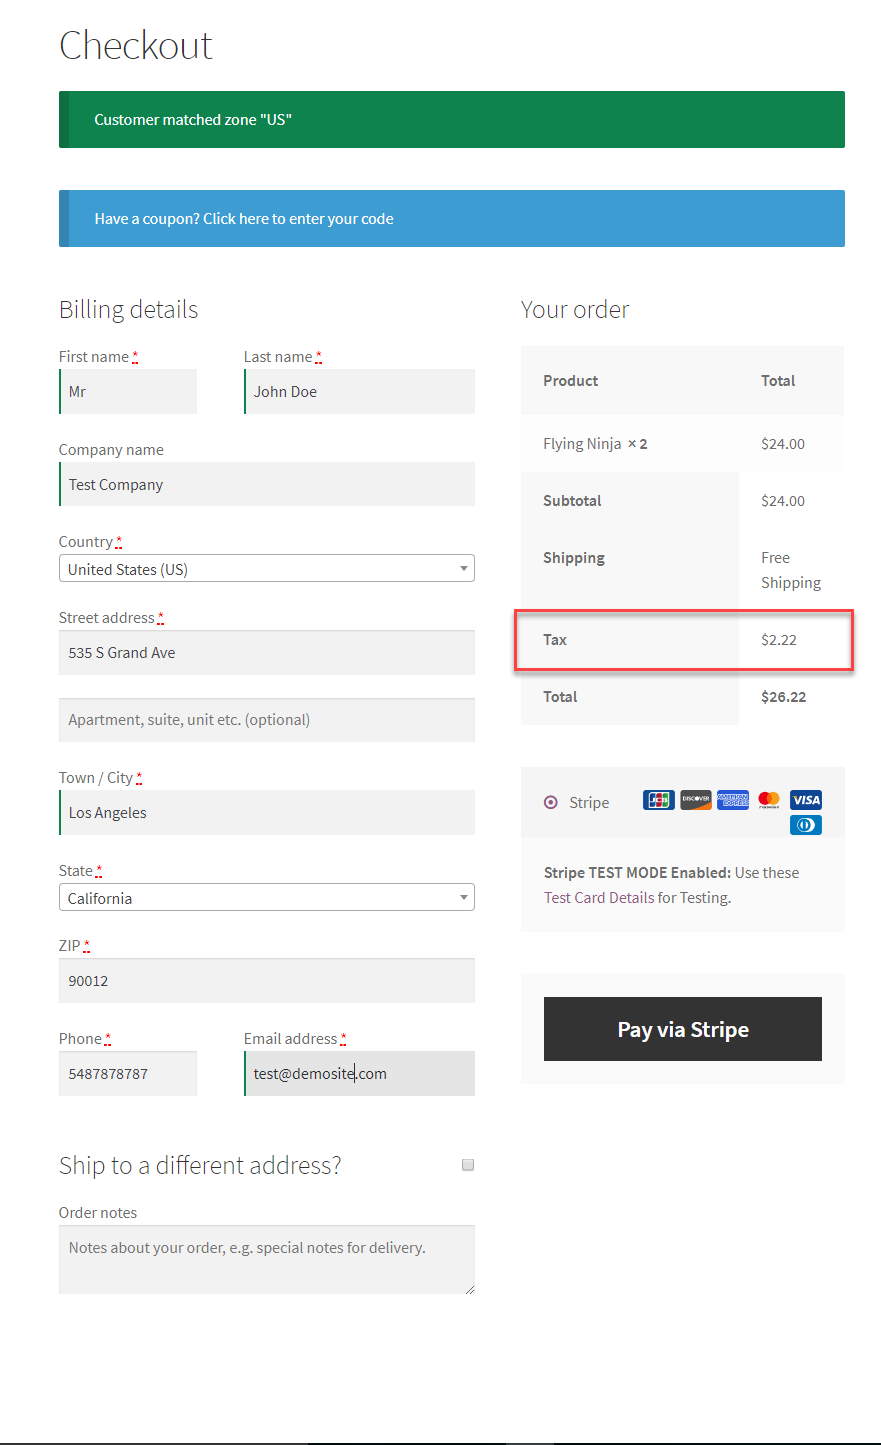 Tax calculations are accurately displayed on the checkout page as well